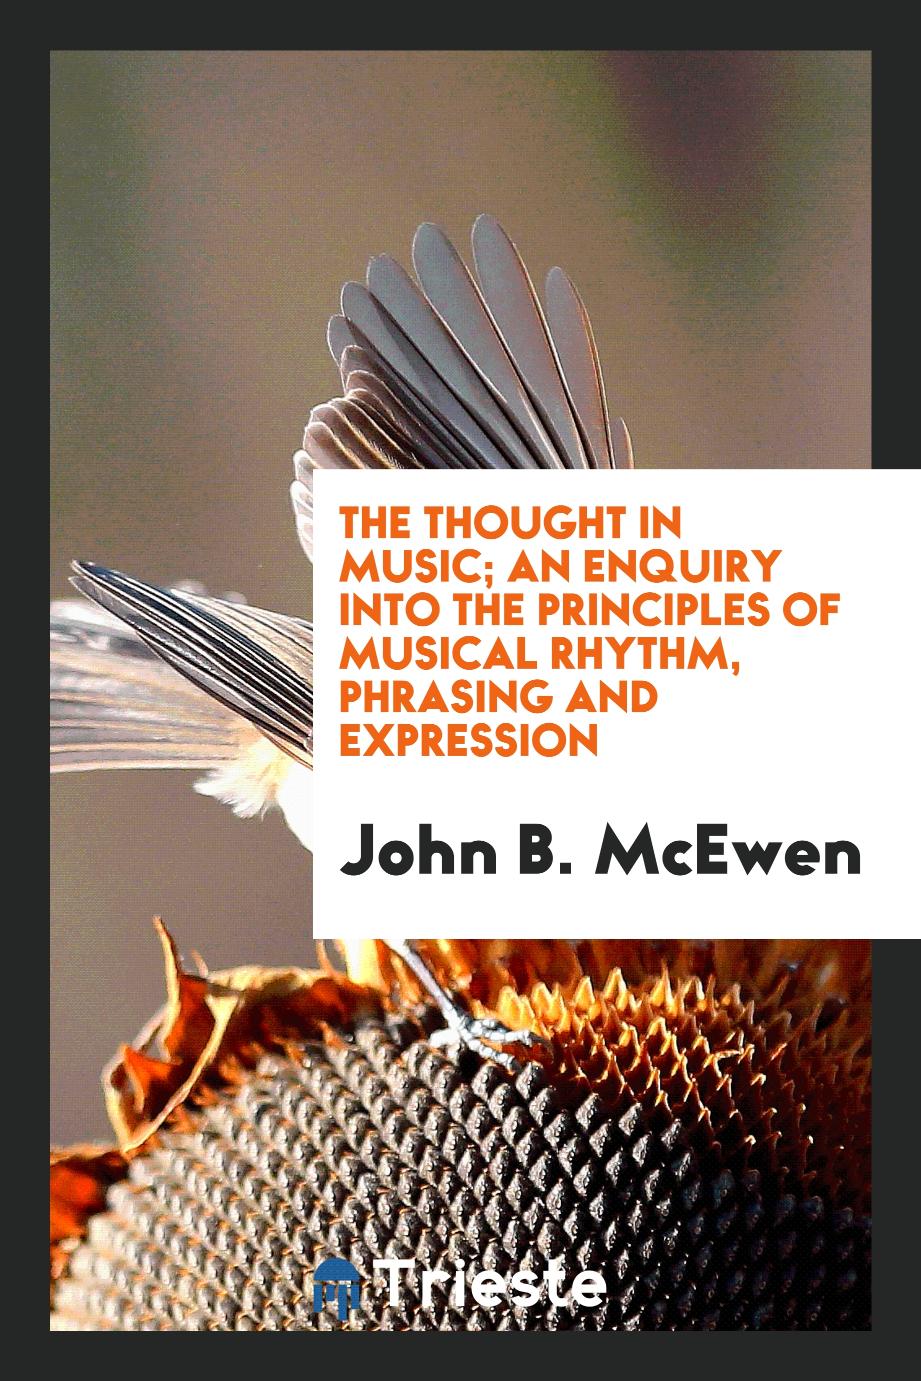 The thought in music; an enquiry into the principles of musical rhythm, phrasing and expression